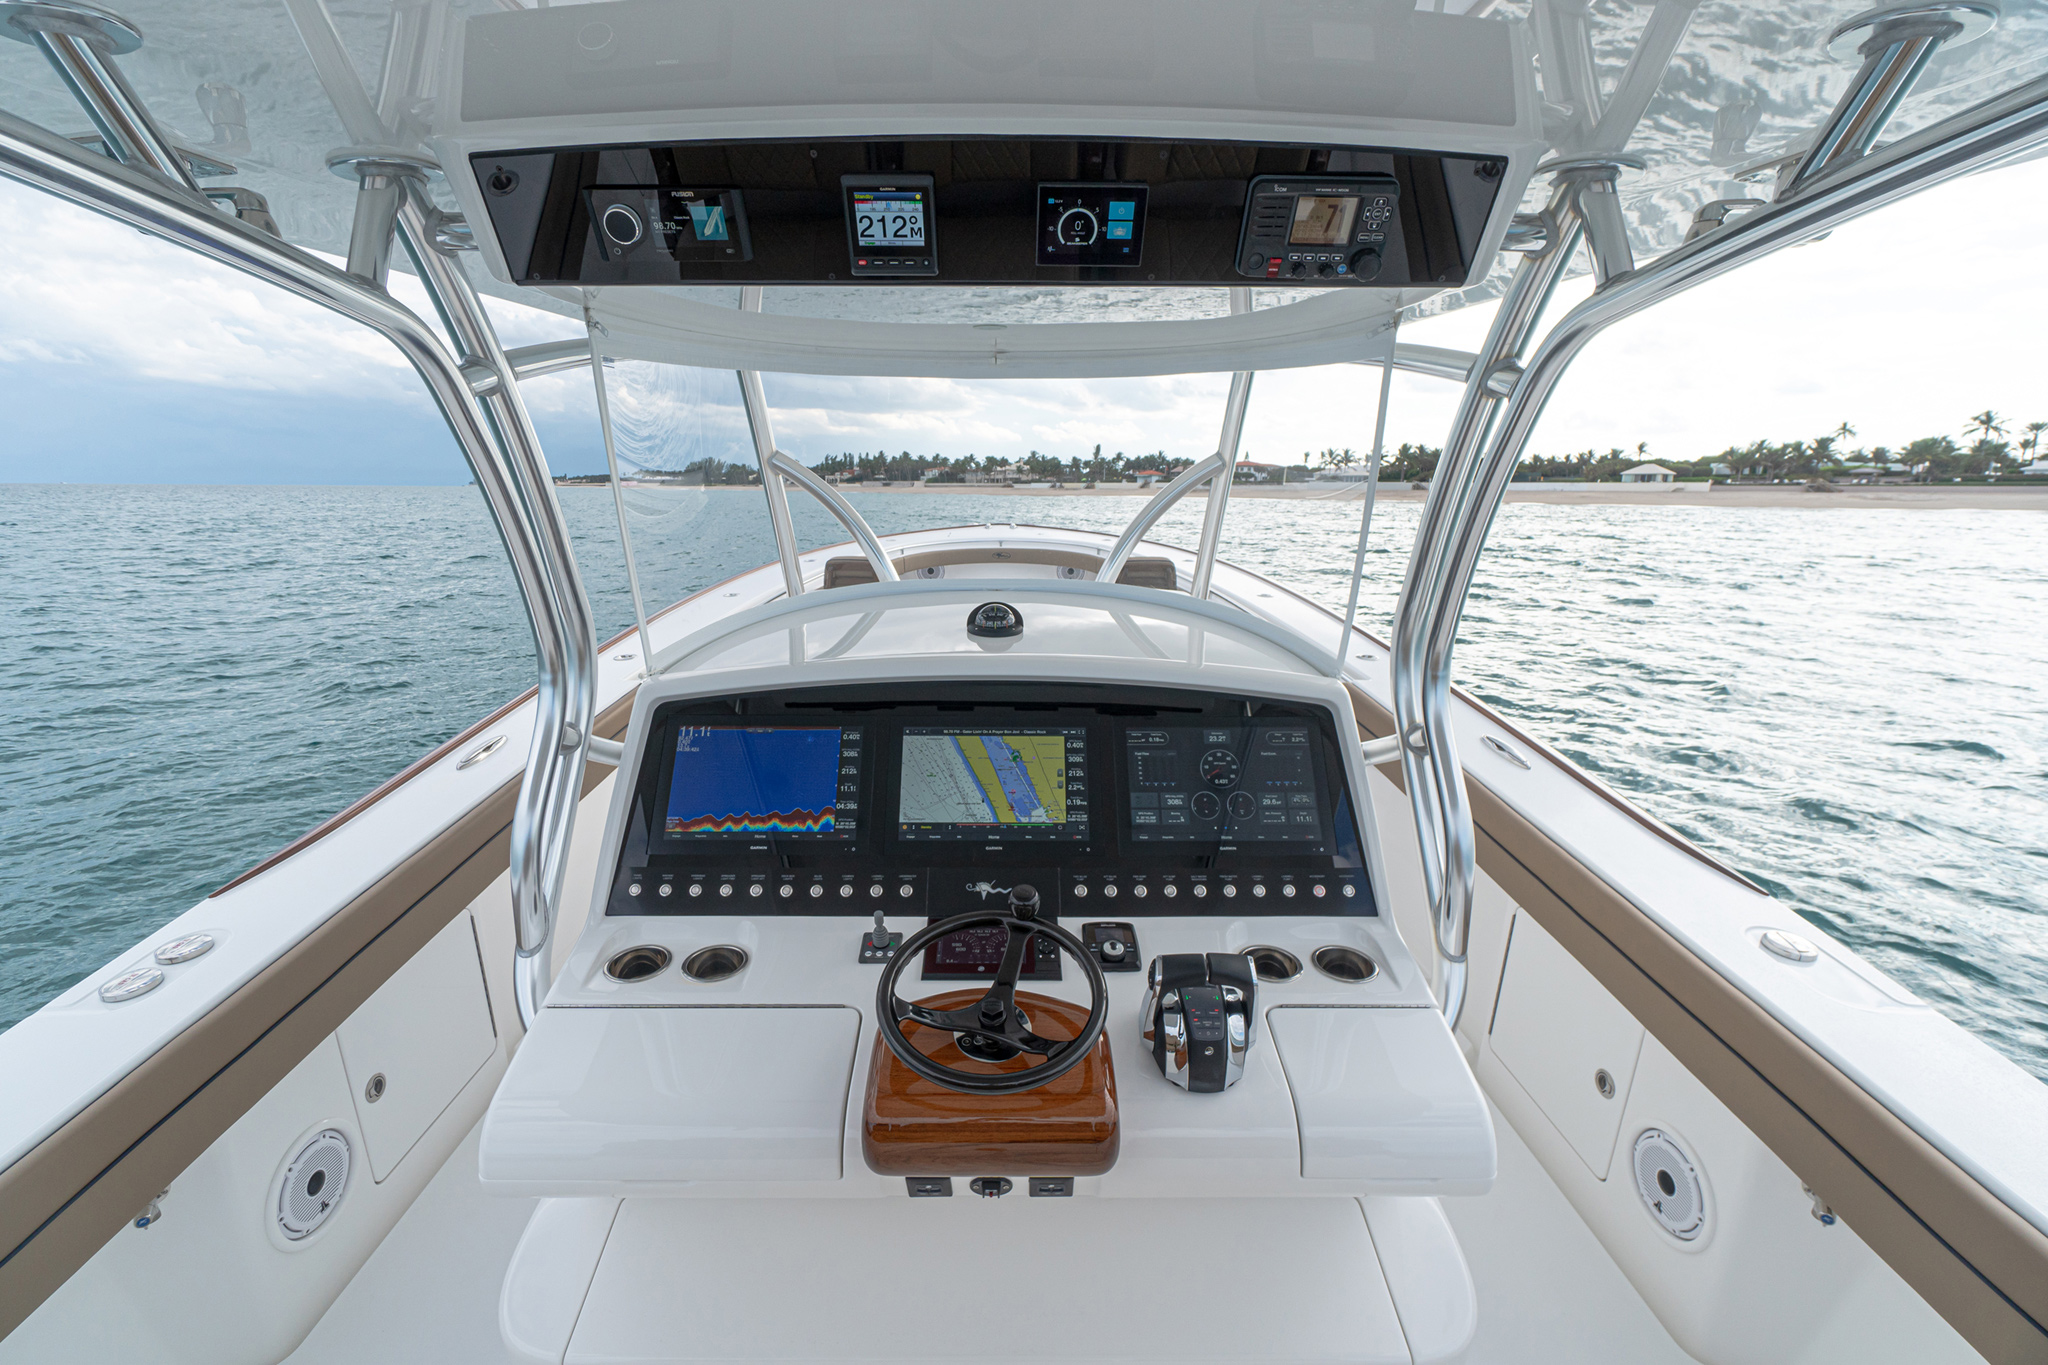 Clean helm layout, molded-in overhead electronics pod, Costa Clear single-panel enclosure (solid Pro Curve glass windshield also available).